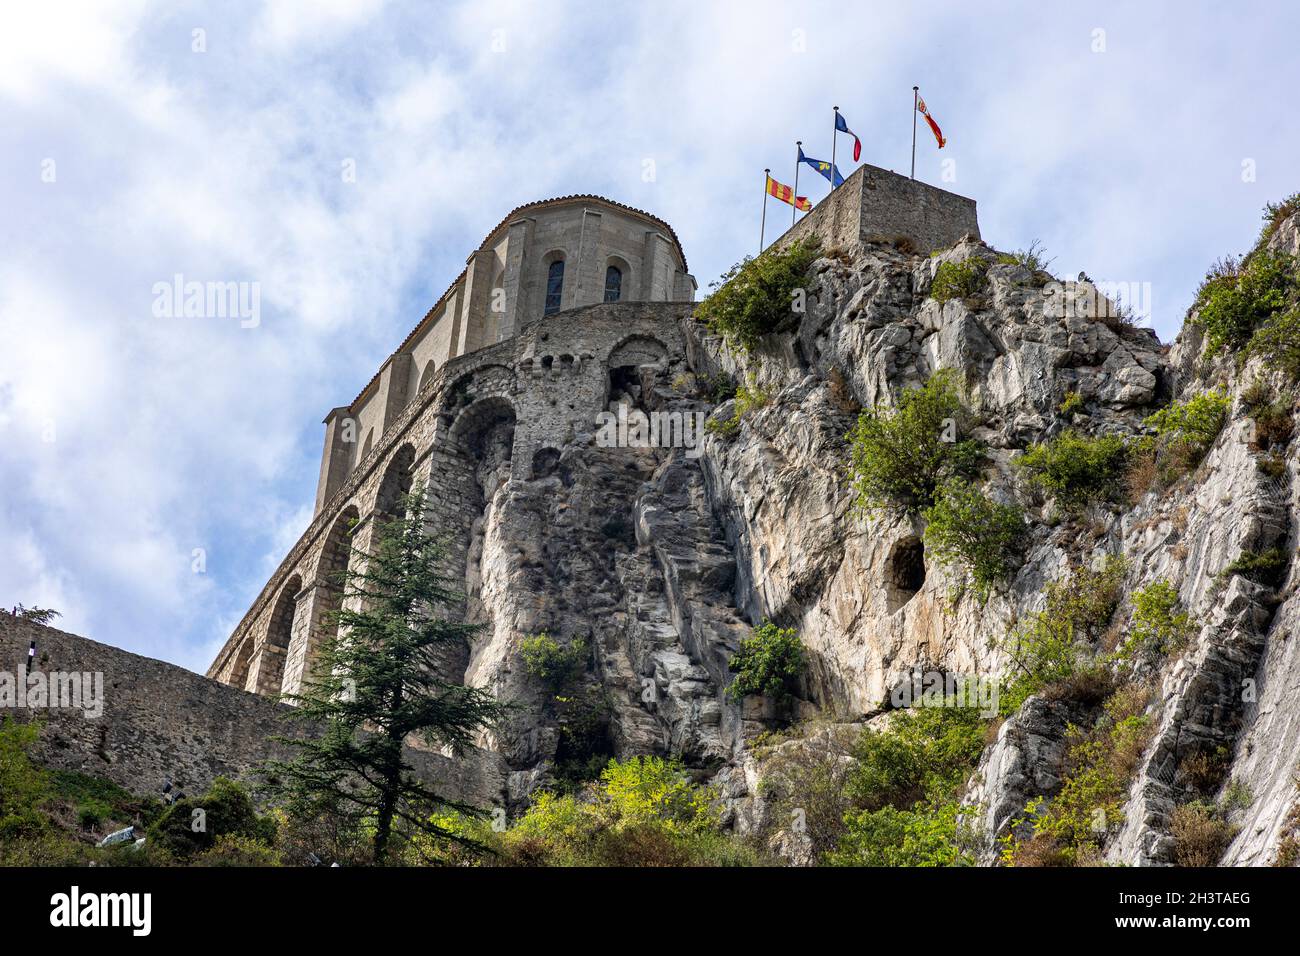 The citadel , Sisteron is in the Alpes-de-Haute-Provence department in the Provence-Alpes-Côte d'Azur region in south-eastern France. Stock Photo